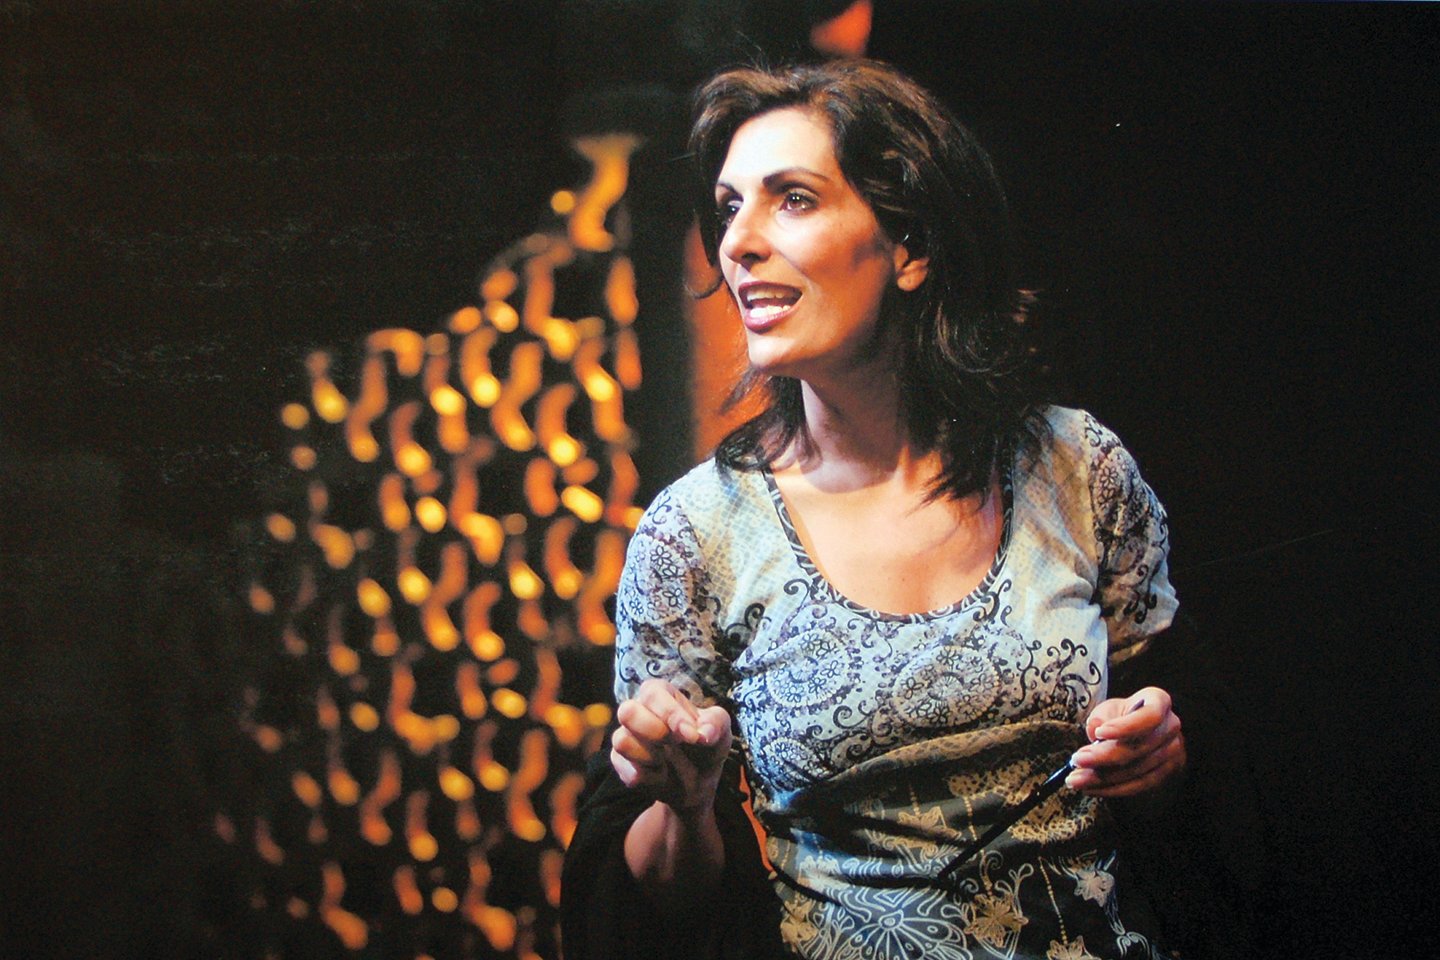 Sarab Kamoo in a production of “9 Parts of Desire” at the Performance Network.